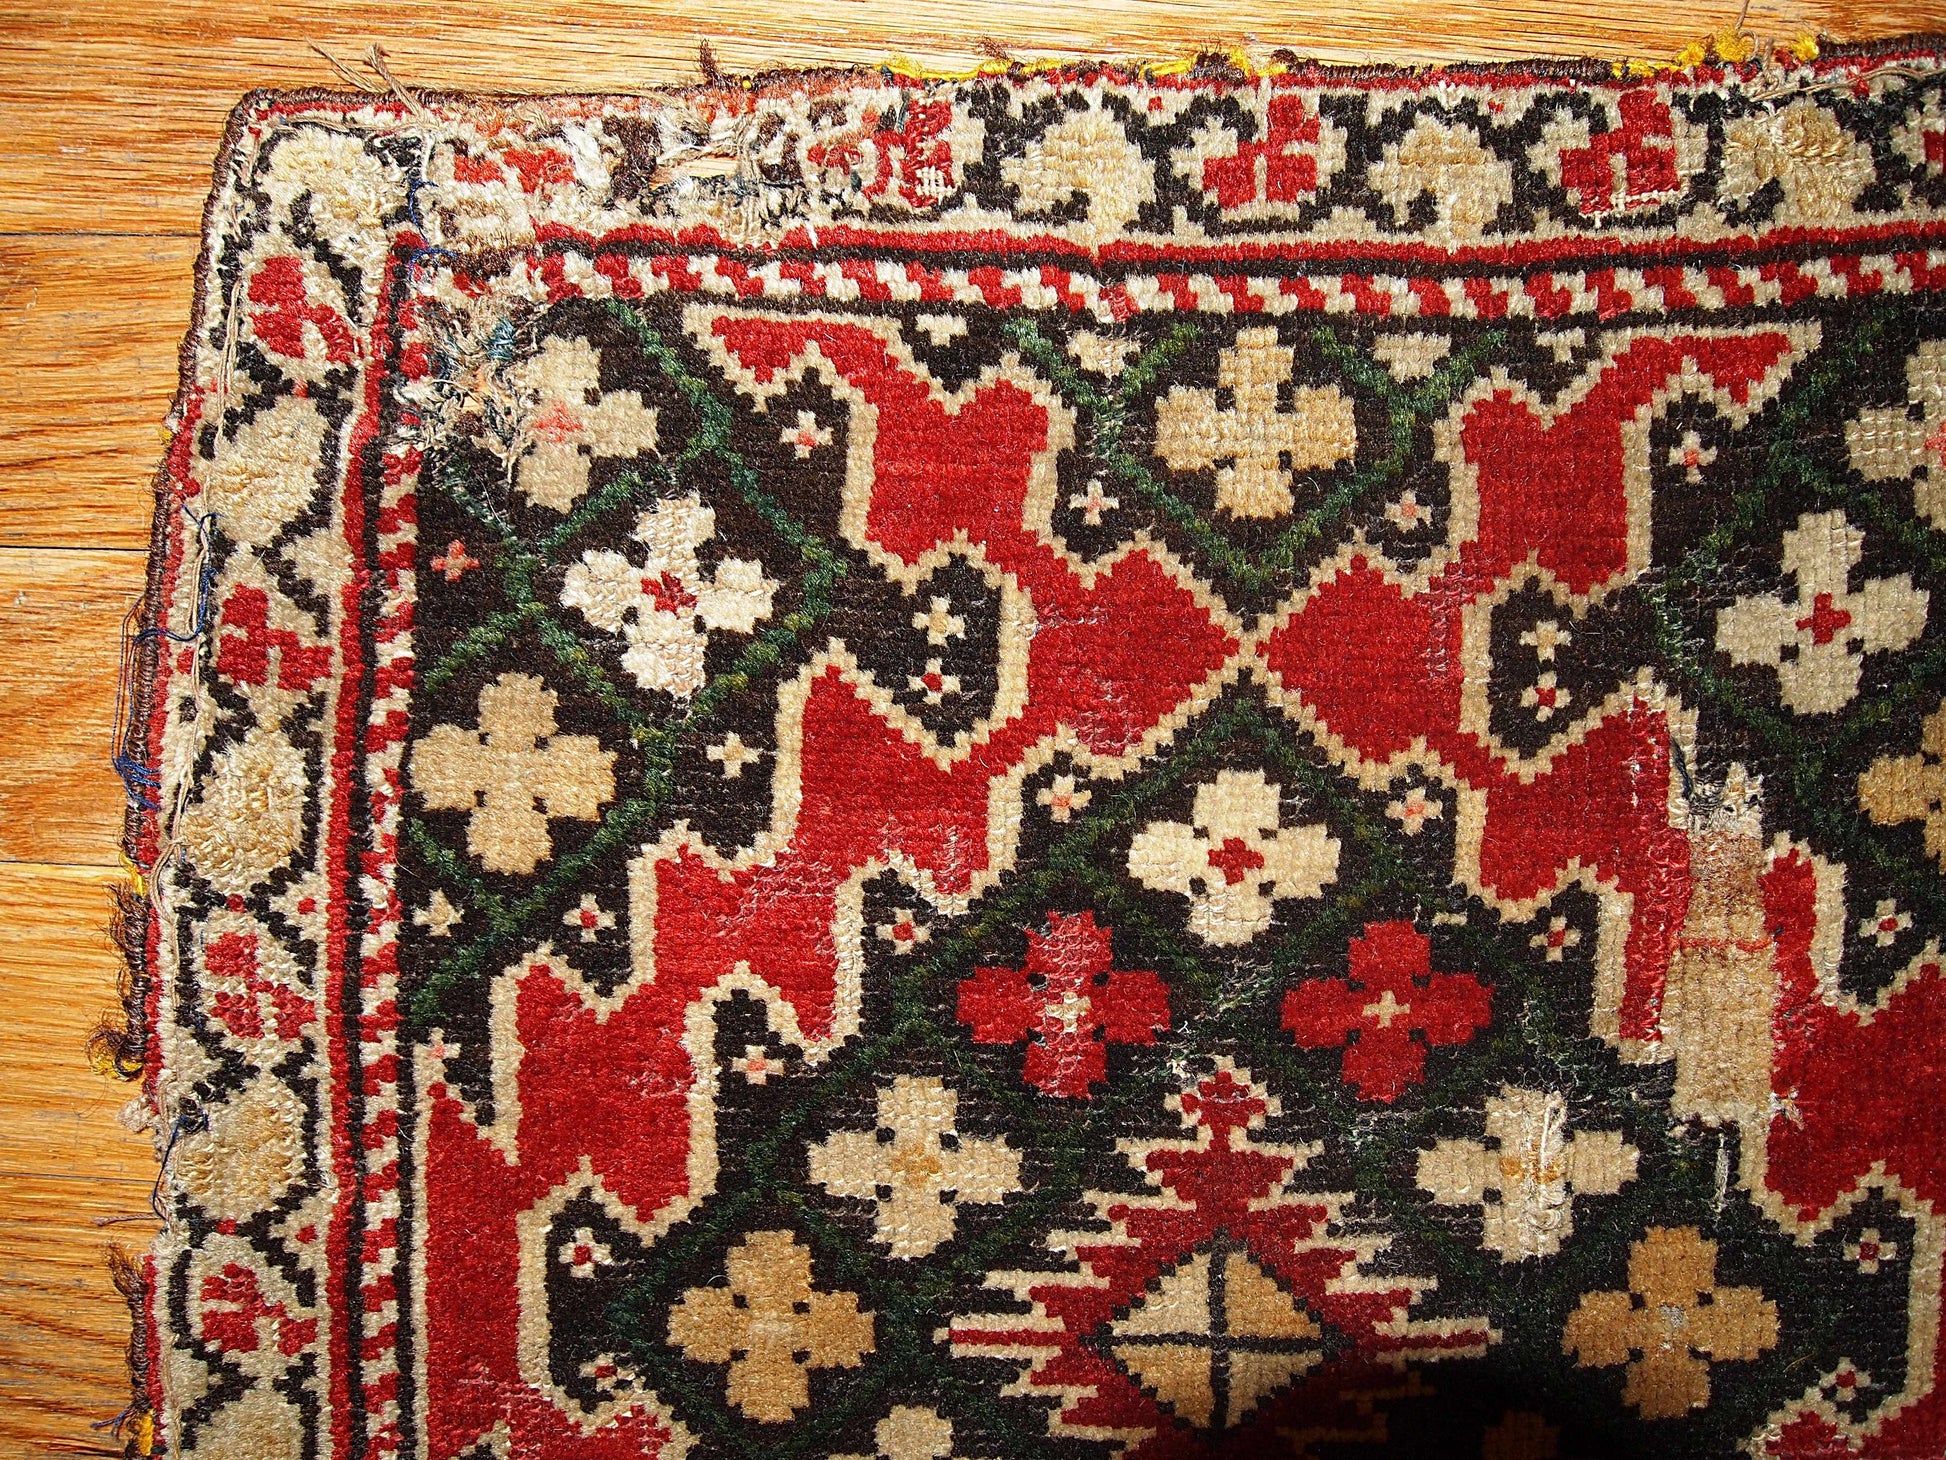 The pair of Armenian Karabaghs  in bright red color and beige borders. The darker shades of the rugs are not completely matchable: on one of them it has grass green color covering chocolate brown field and on another piece it is bright blue.